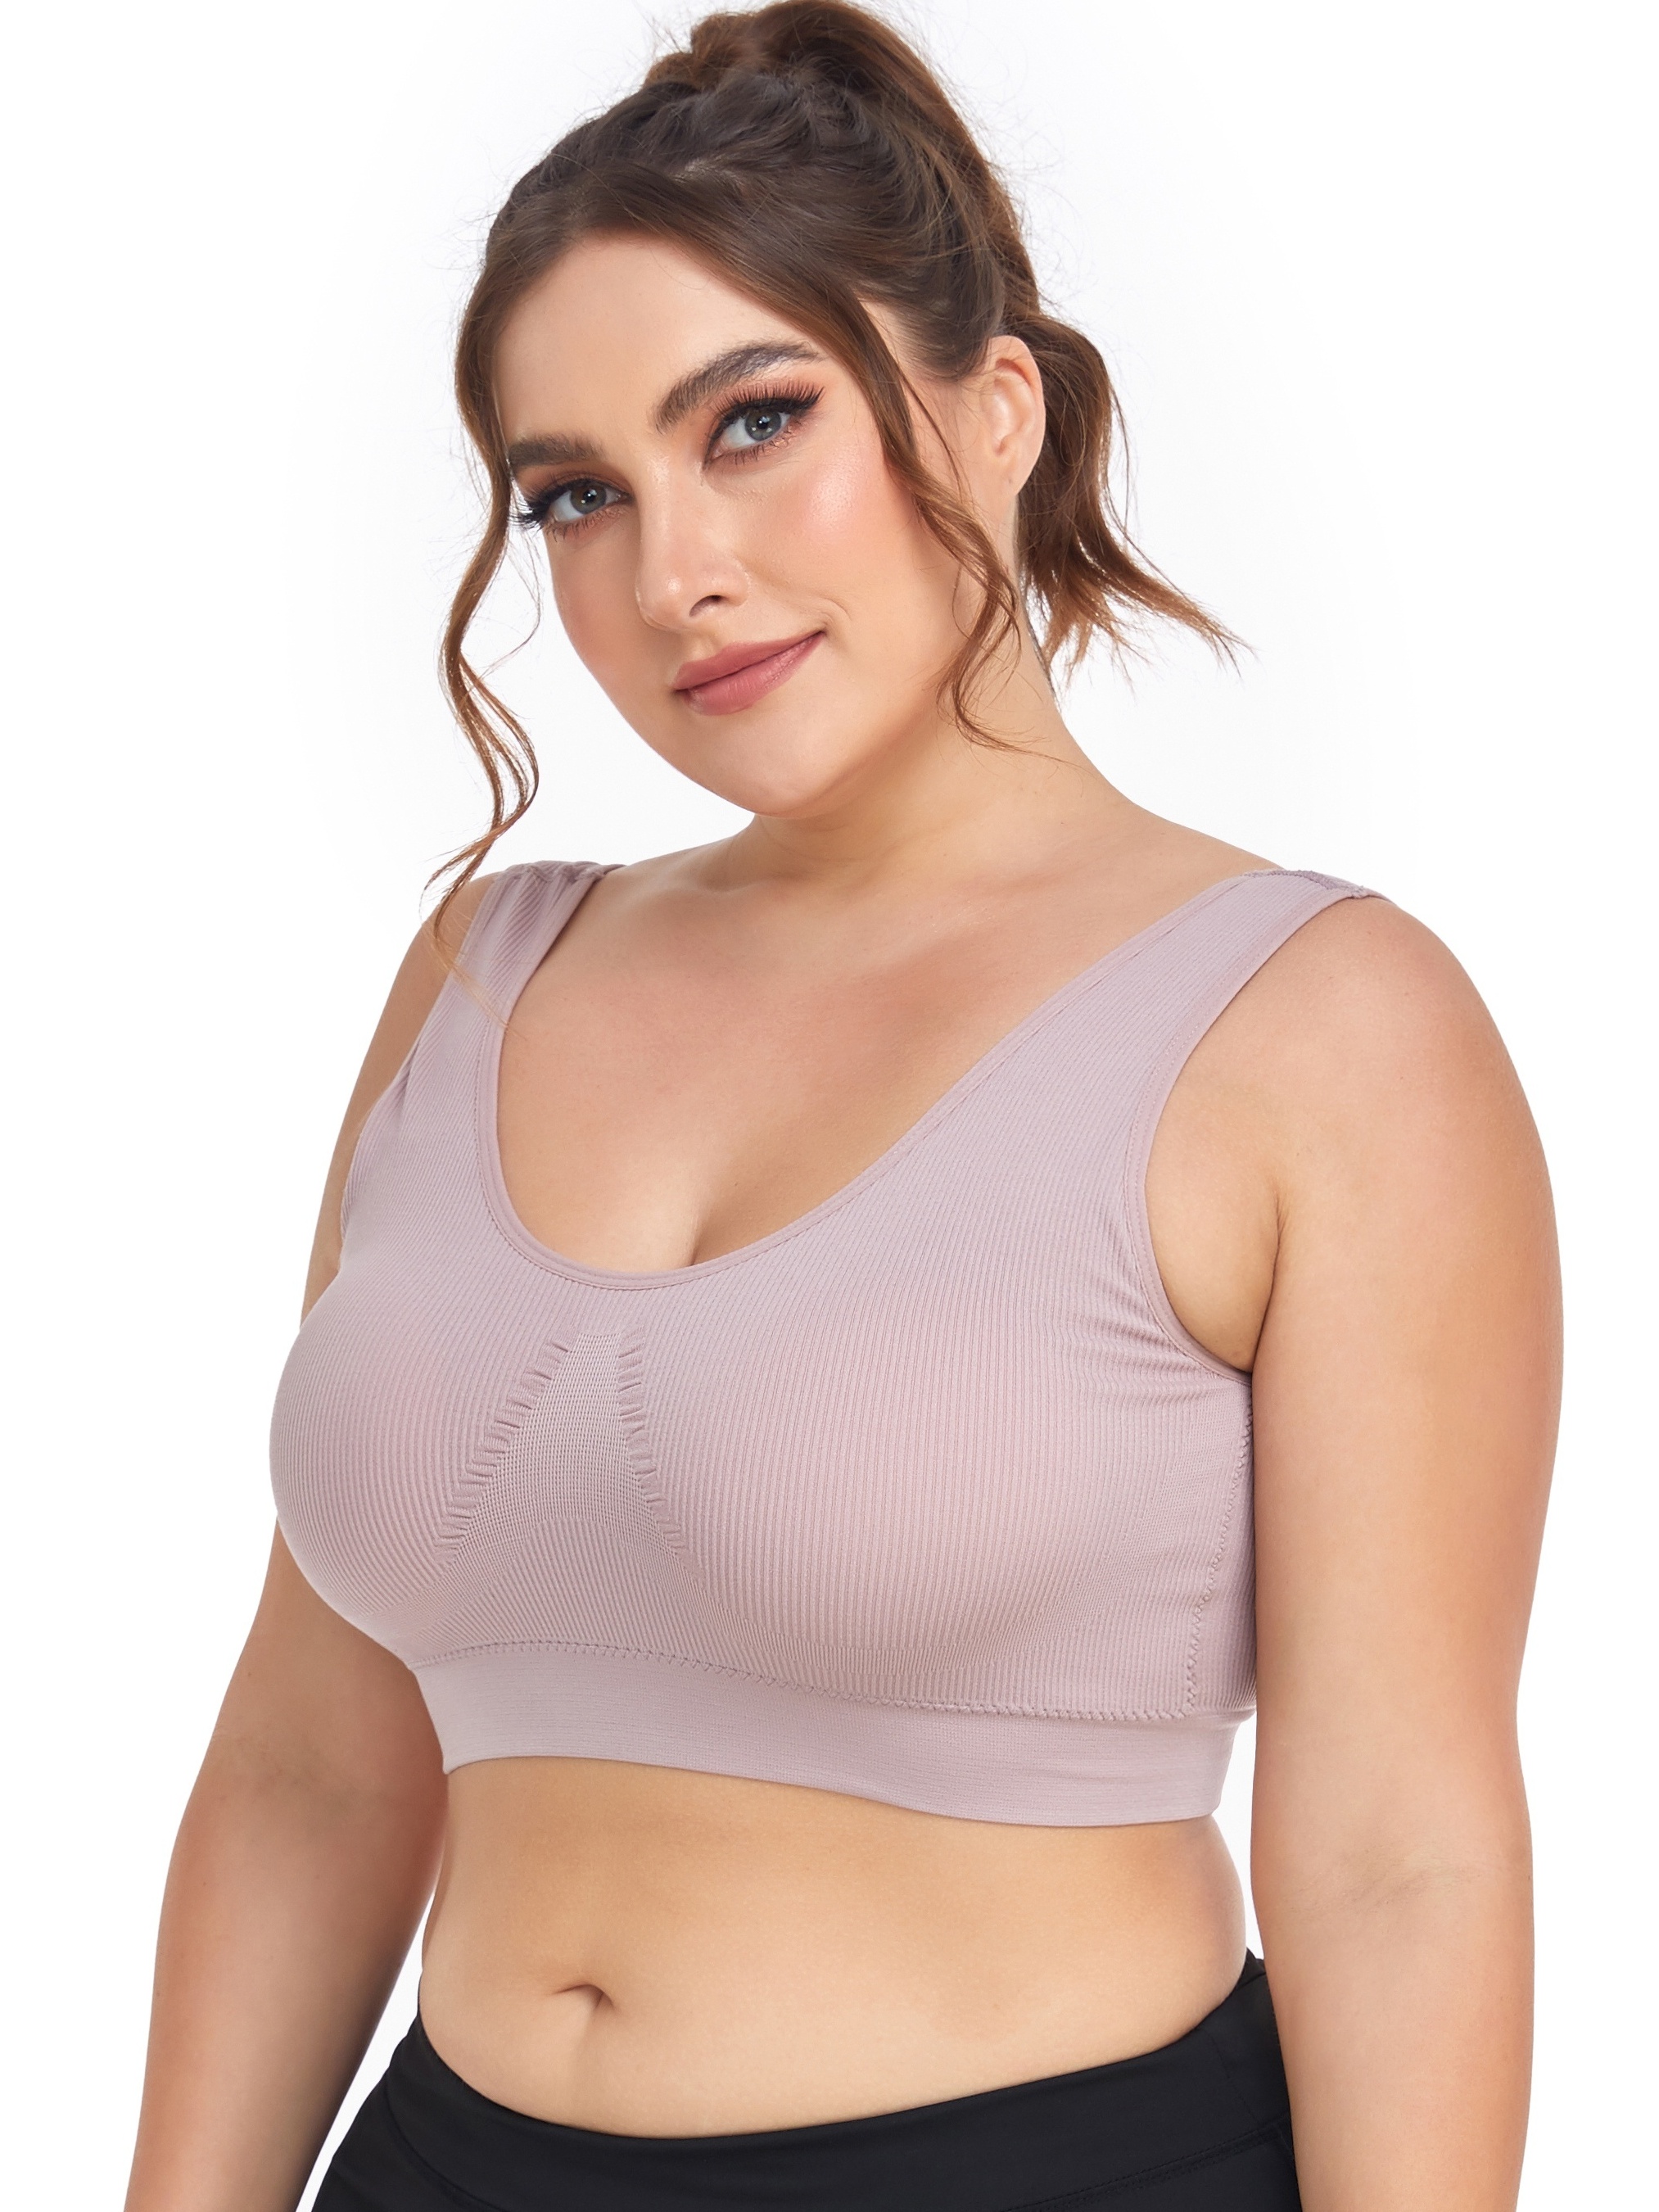 Large Version Of Seamless High-stretch Breastfeeding Vest For Fat